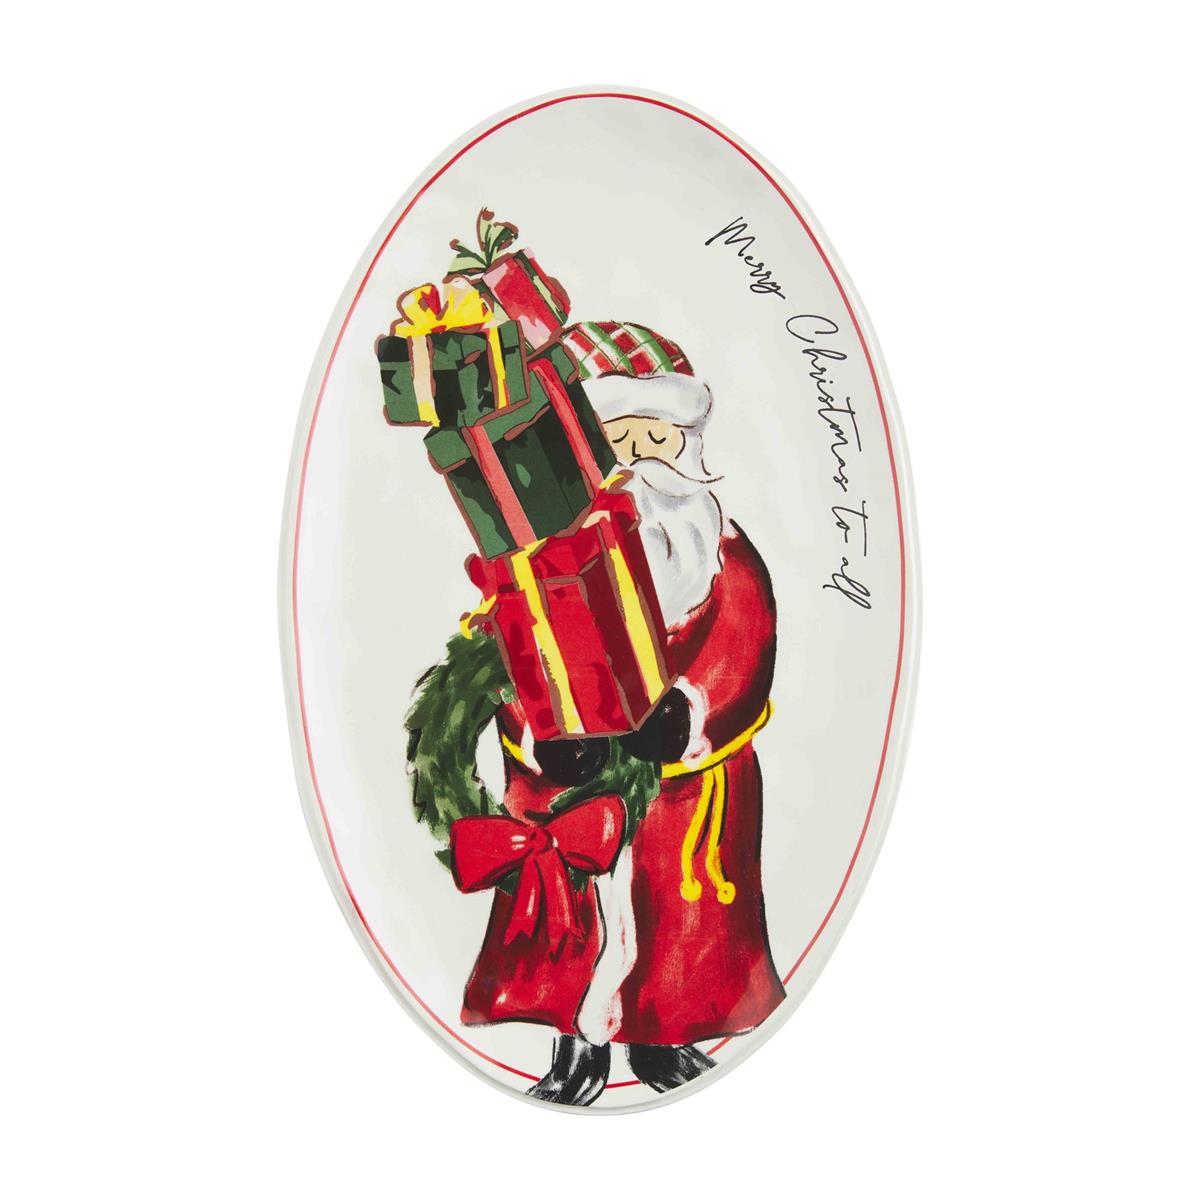 oval platter with image of santa with white beard and fair skin tone carrying a stack of gifts and a wreath with a red bow.